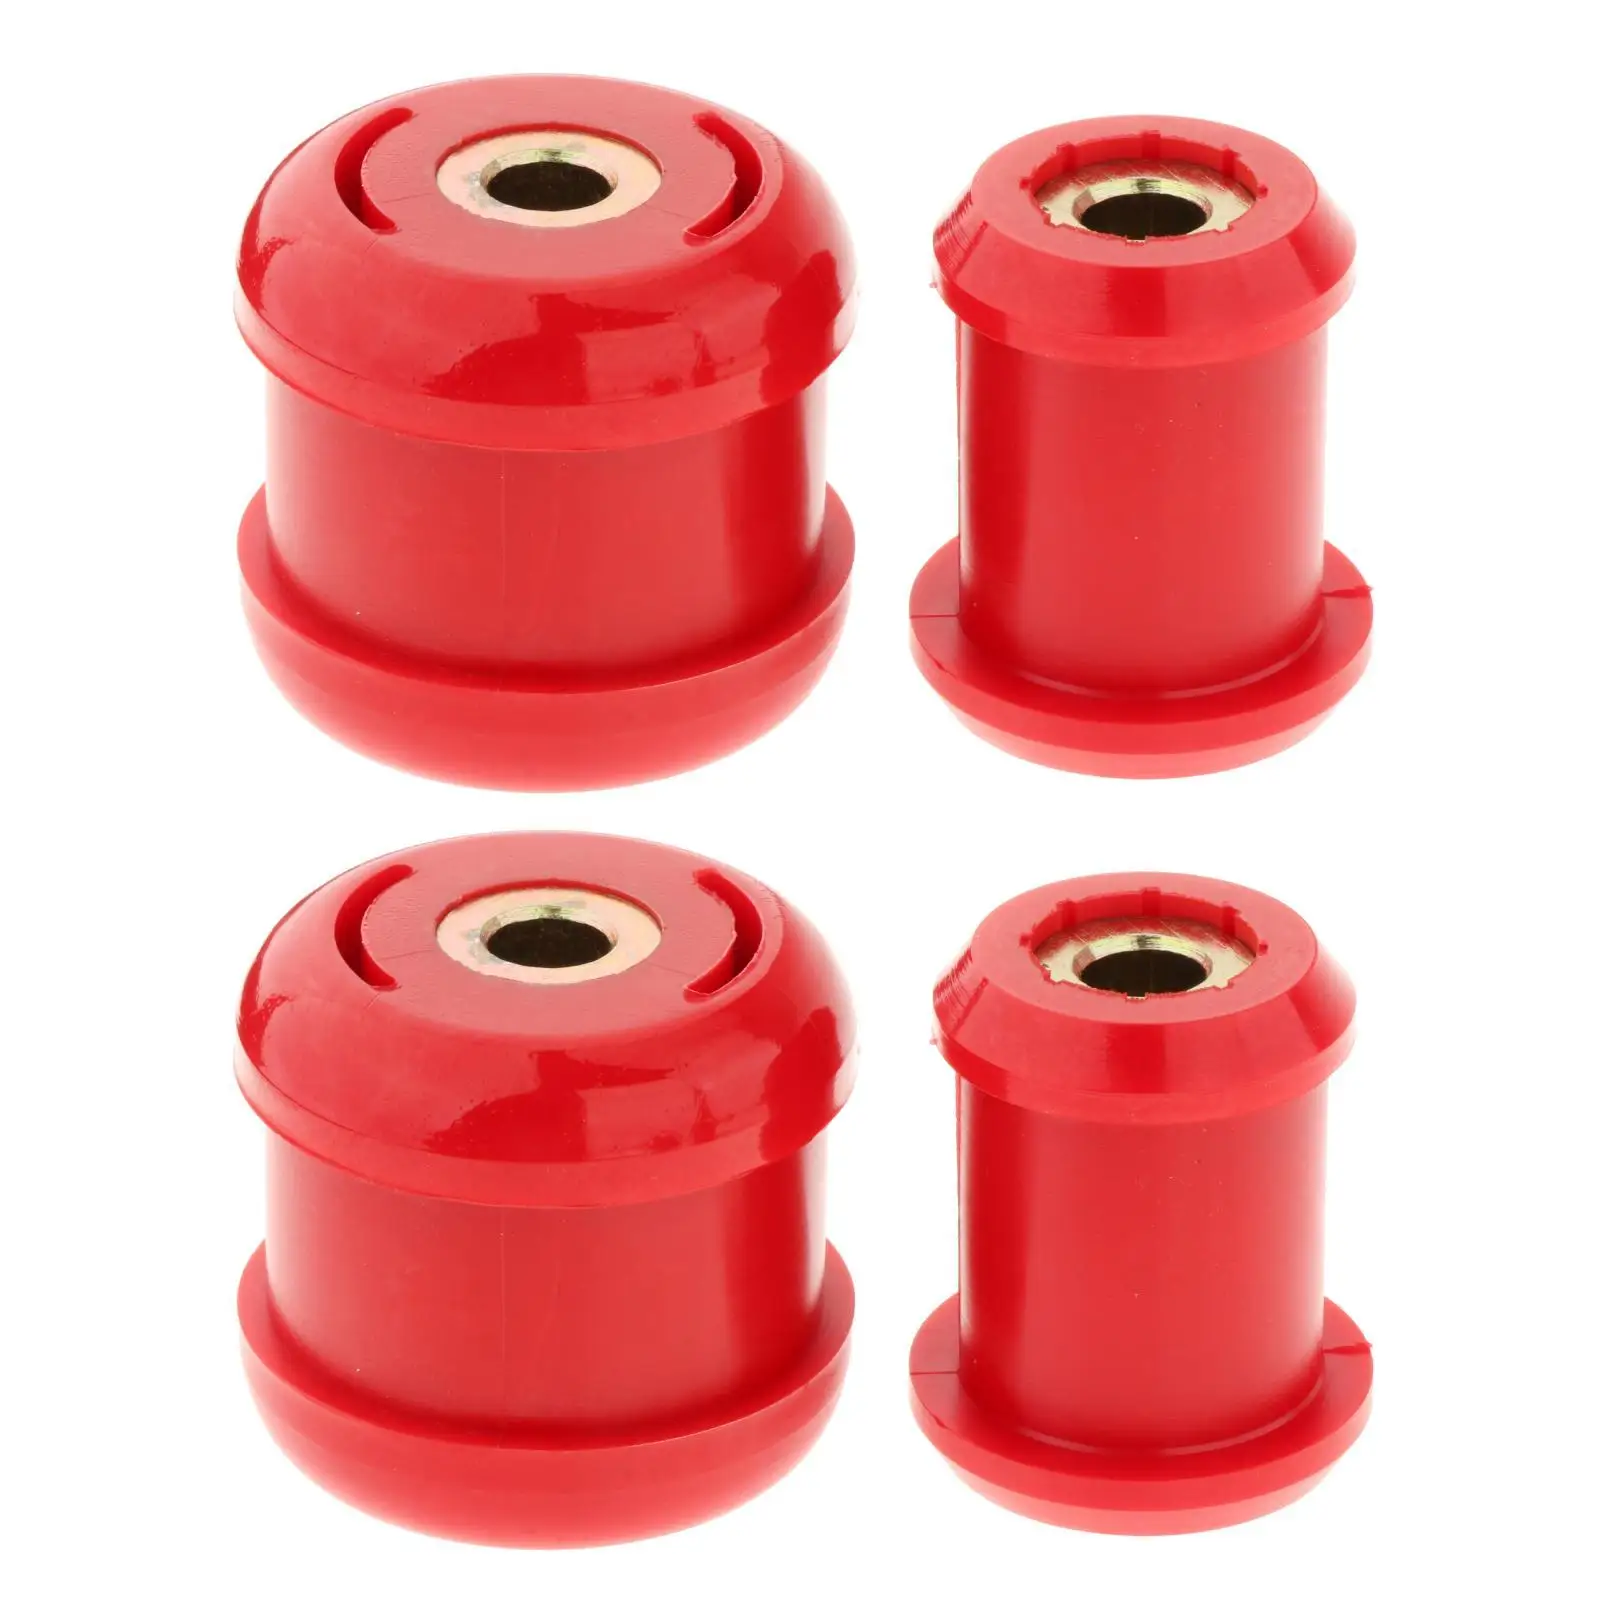 Control Arm Bushing Replacement Car Parts Red for RSX 2002-2006